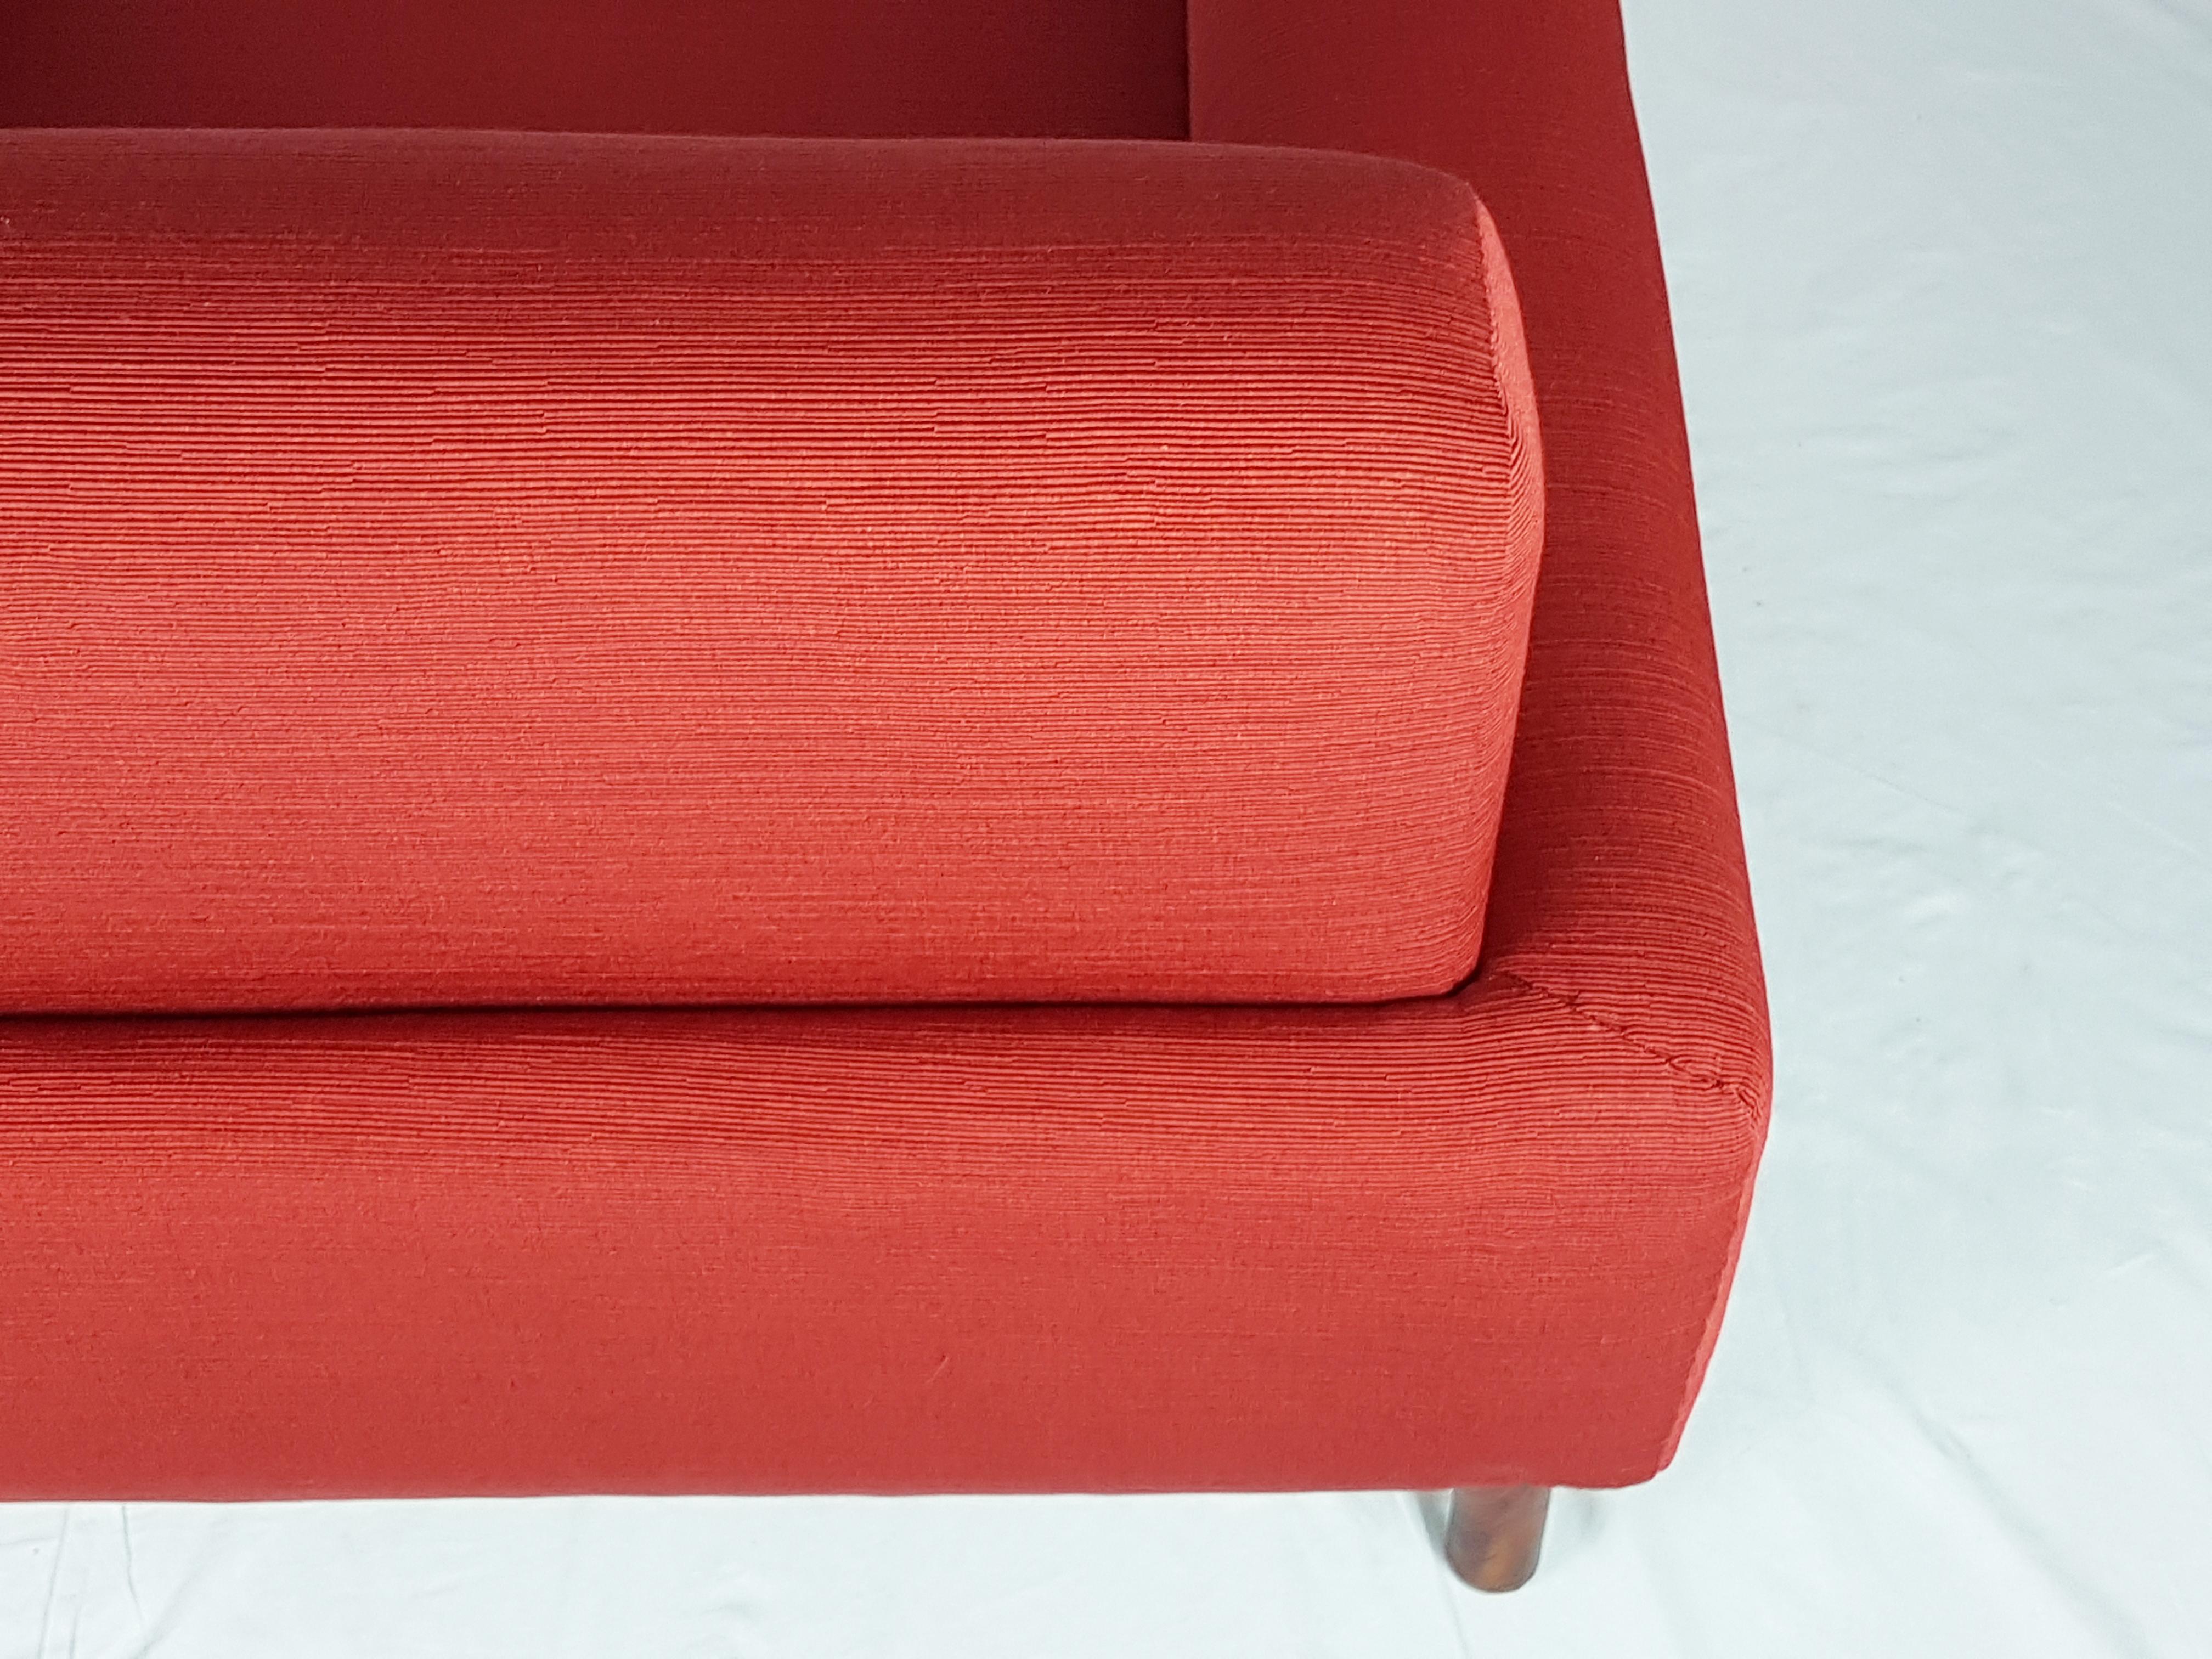 Pair of Wood & Brick Red Fabric 1960 Armchair by S. Saporiti for F.Lli Saporiti For Sale 7